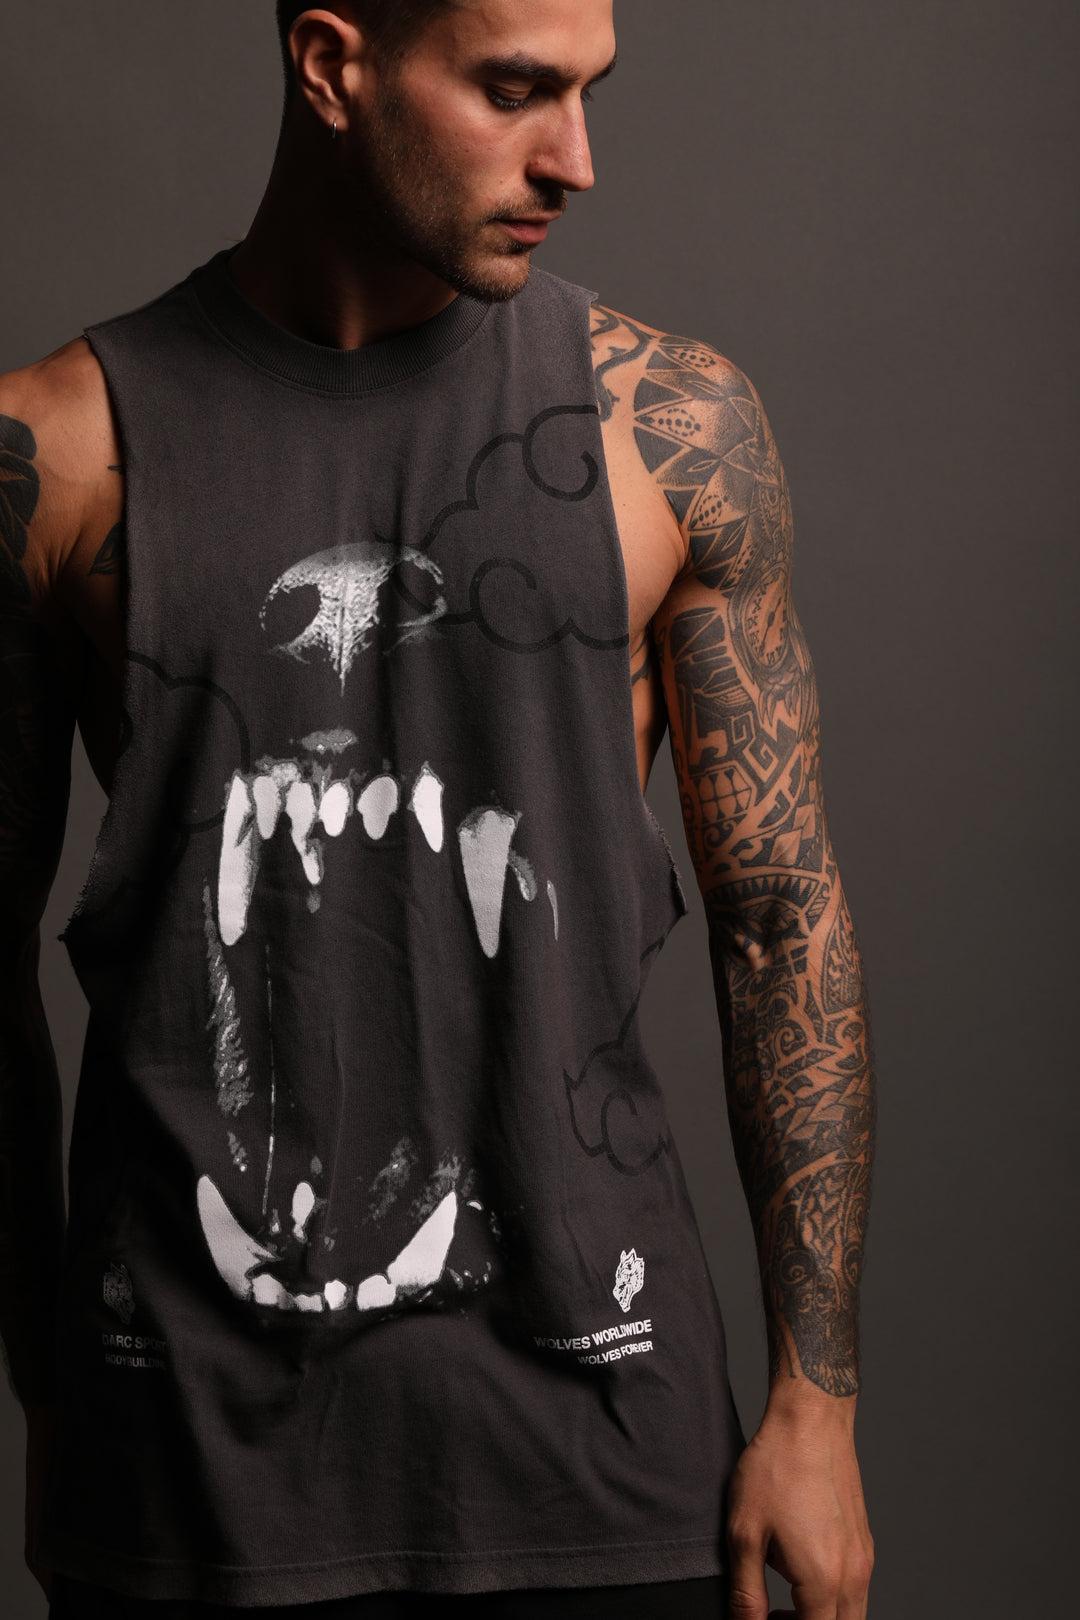 Blood Clouds "Tommy" Muscle Tee in Wolf Gray